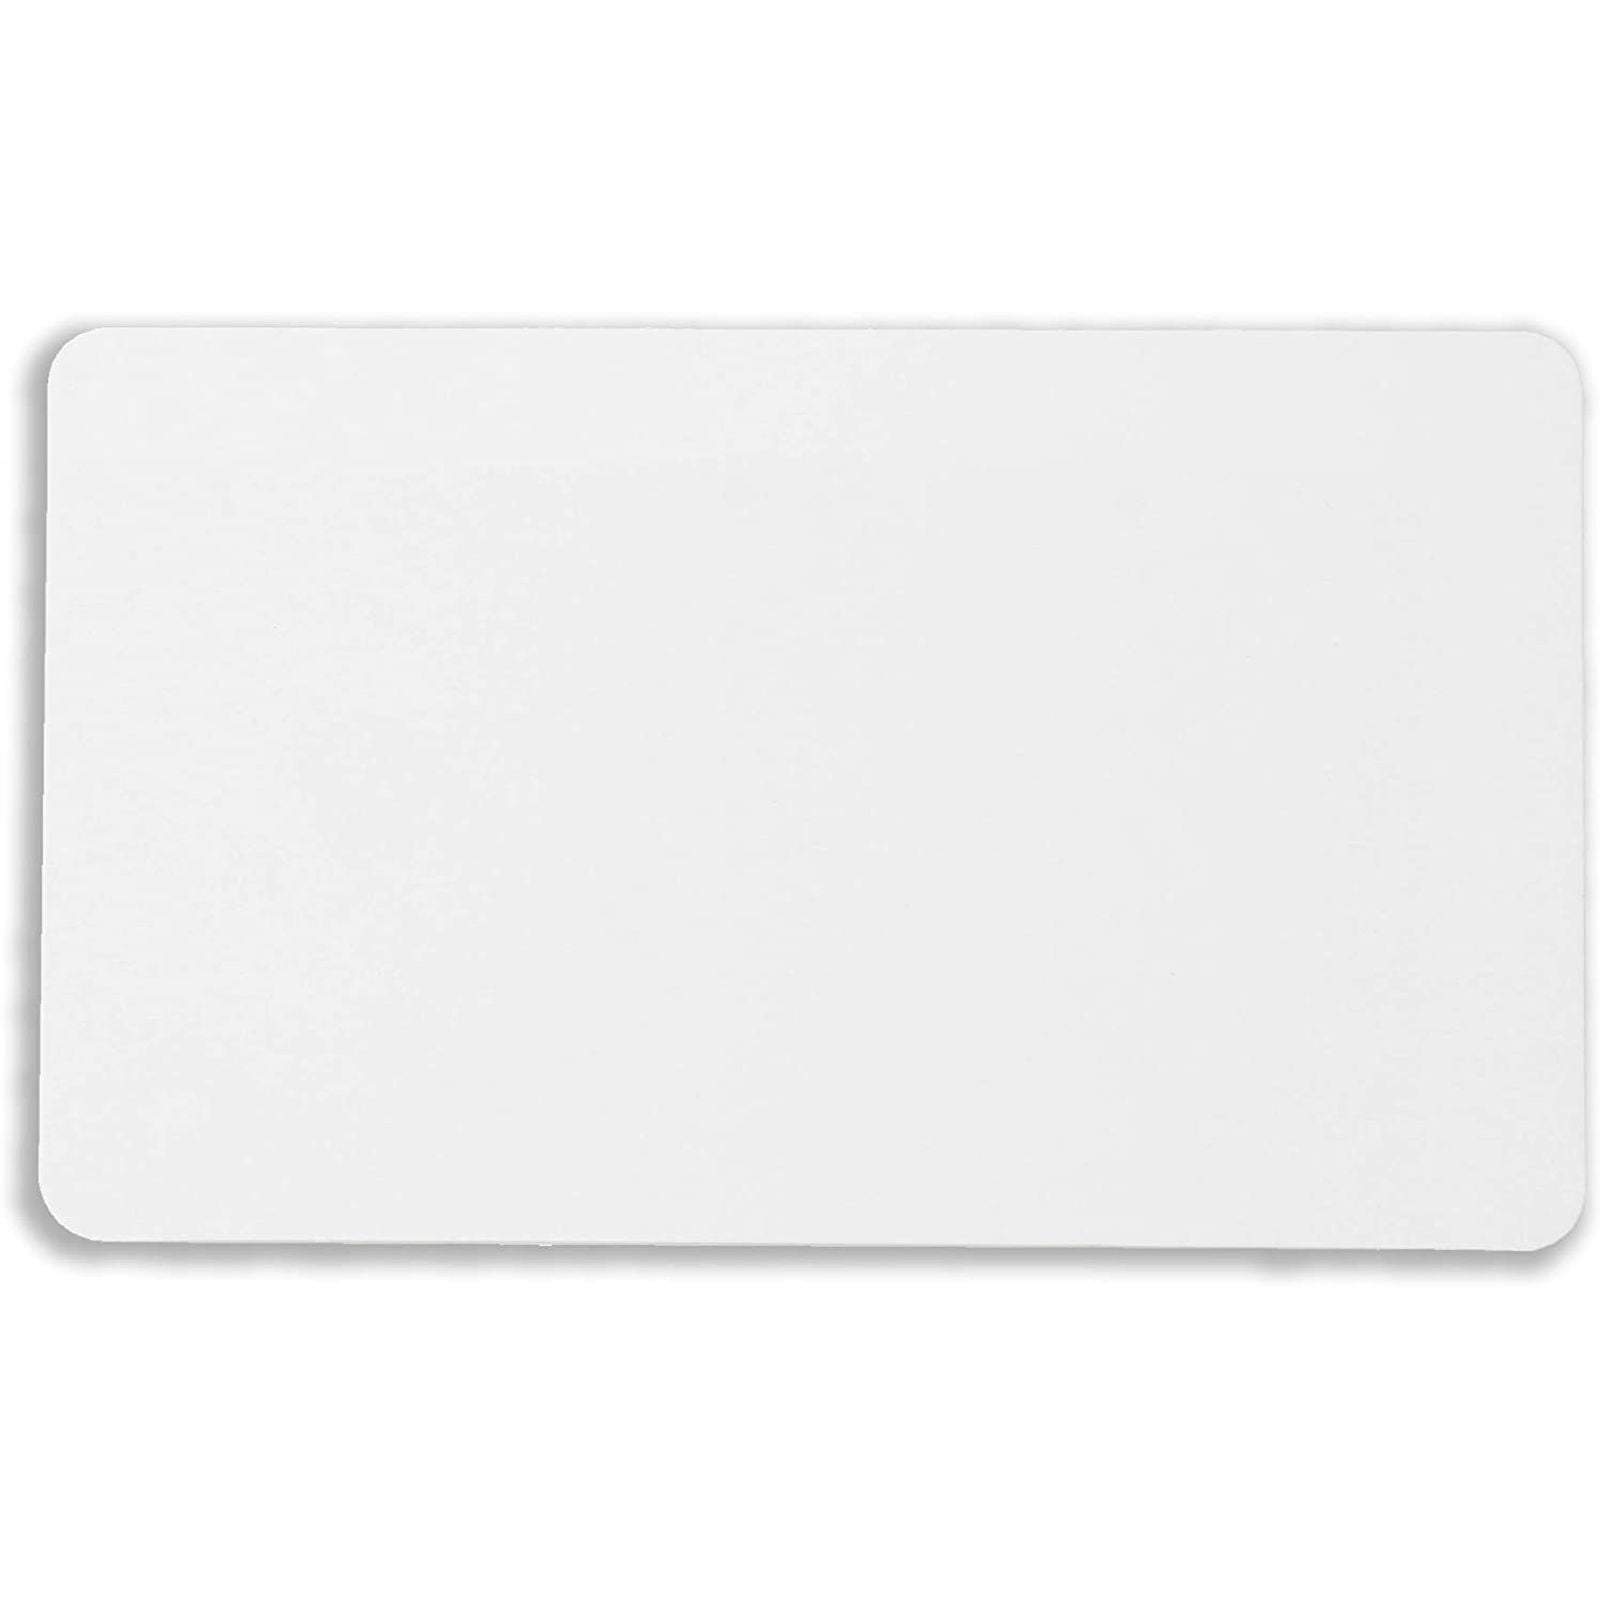 Juvale Pack of 100 Blank Flash Cards for Study or DIY Use - Plain Index Cards